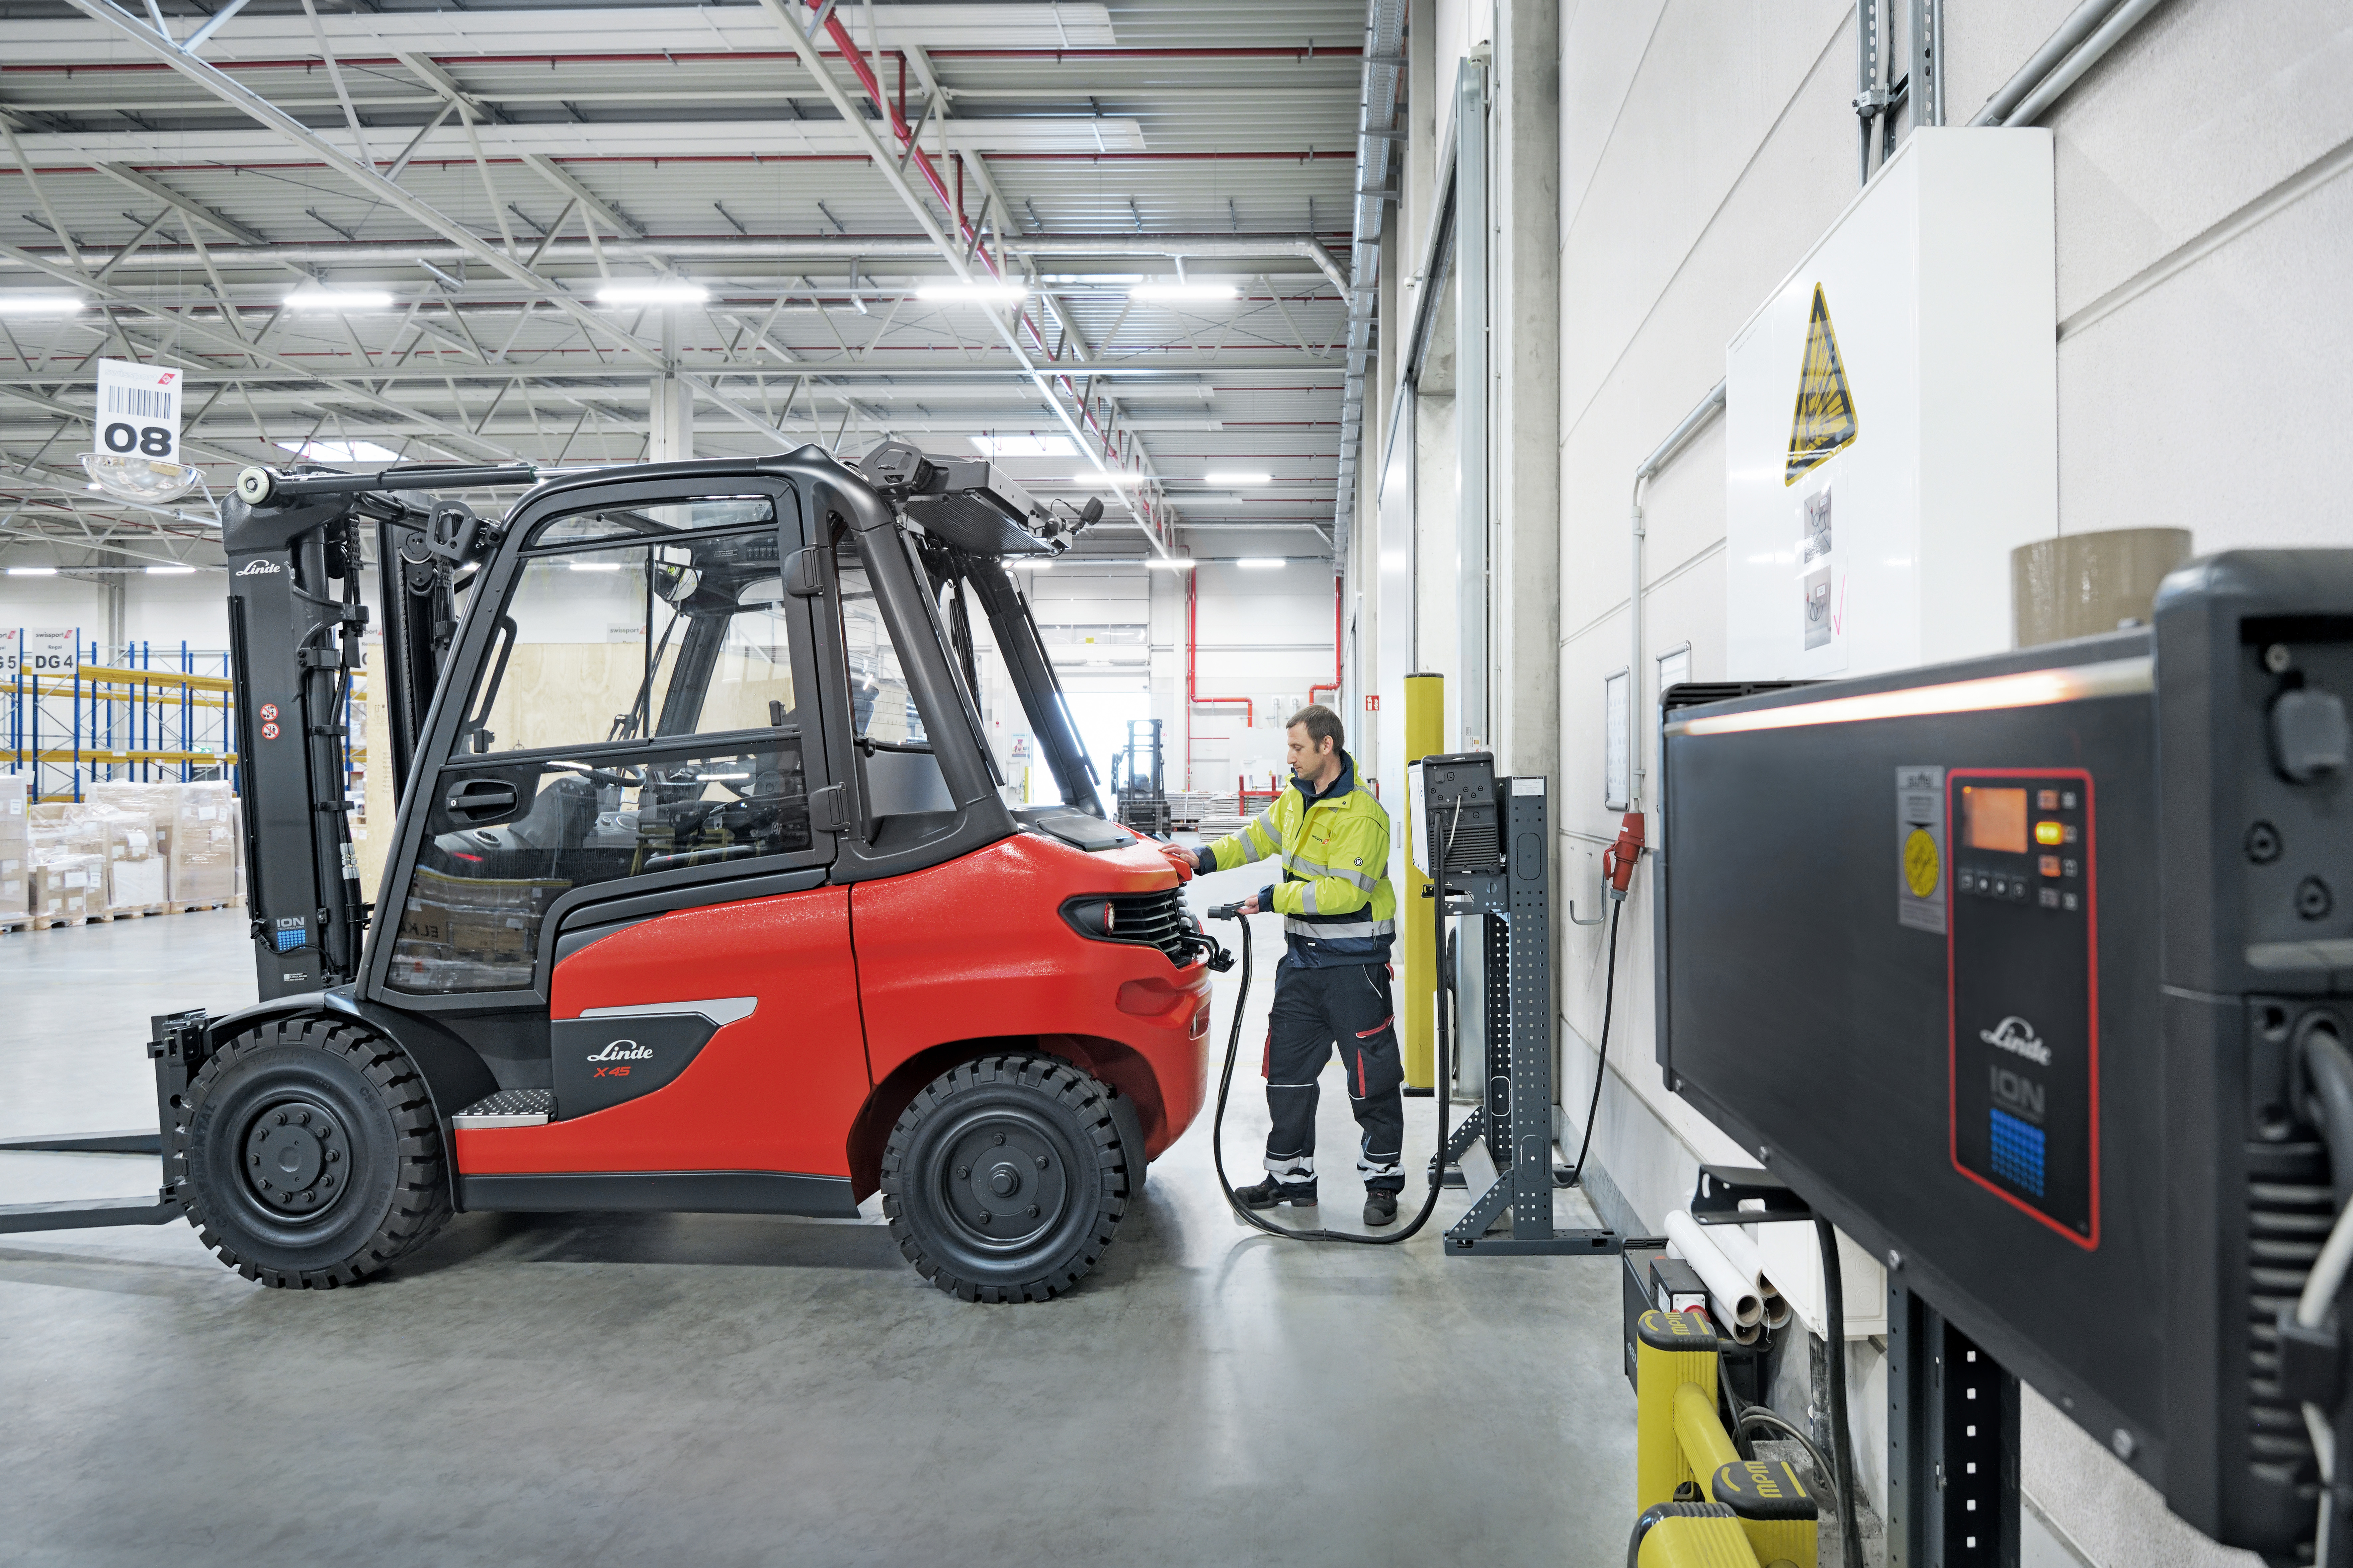 Linde lithium-ion battery powered counterbalance forklift getting charged